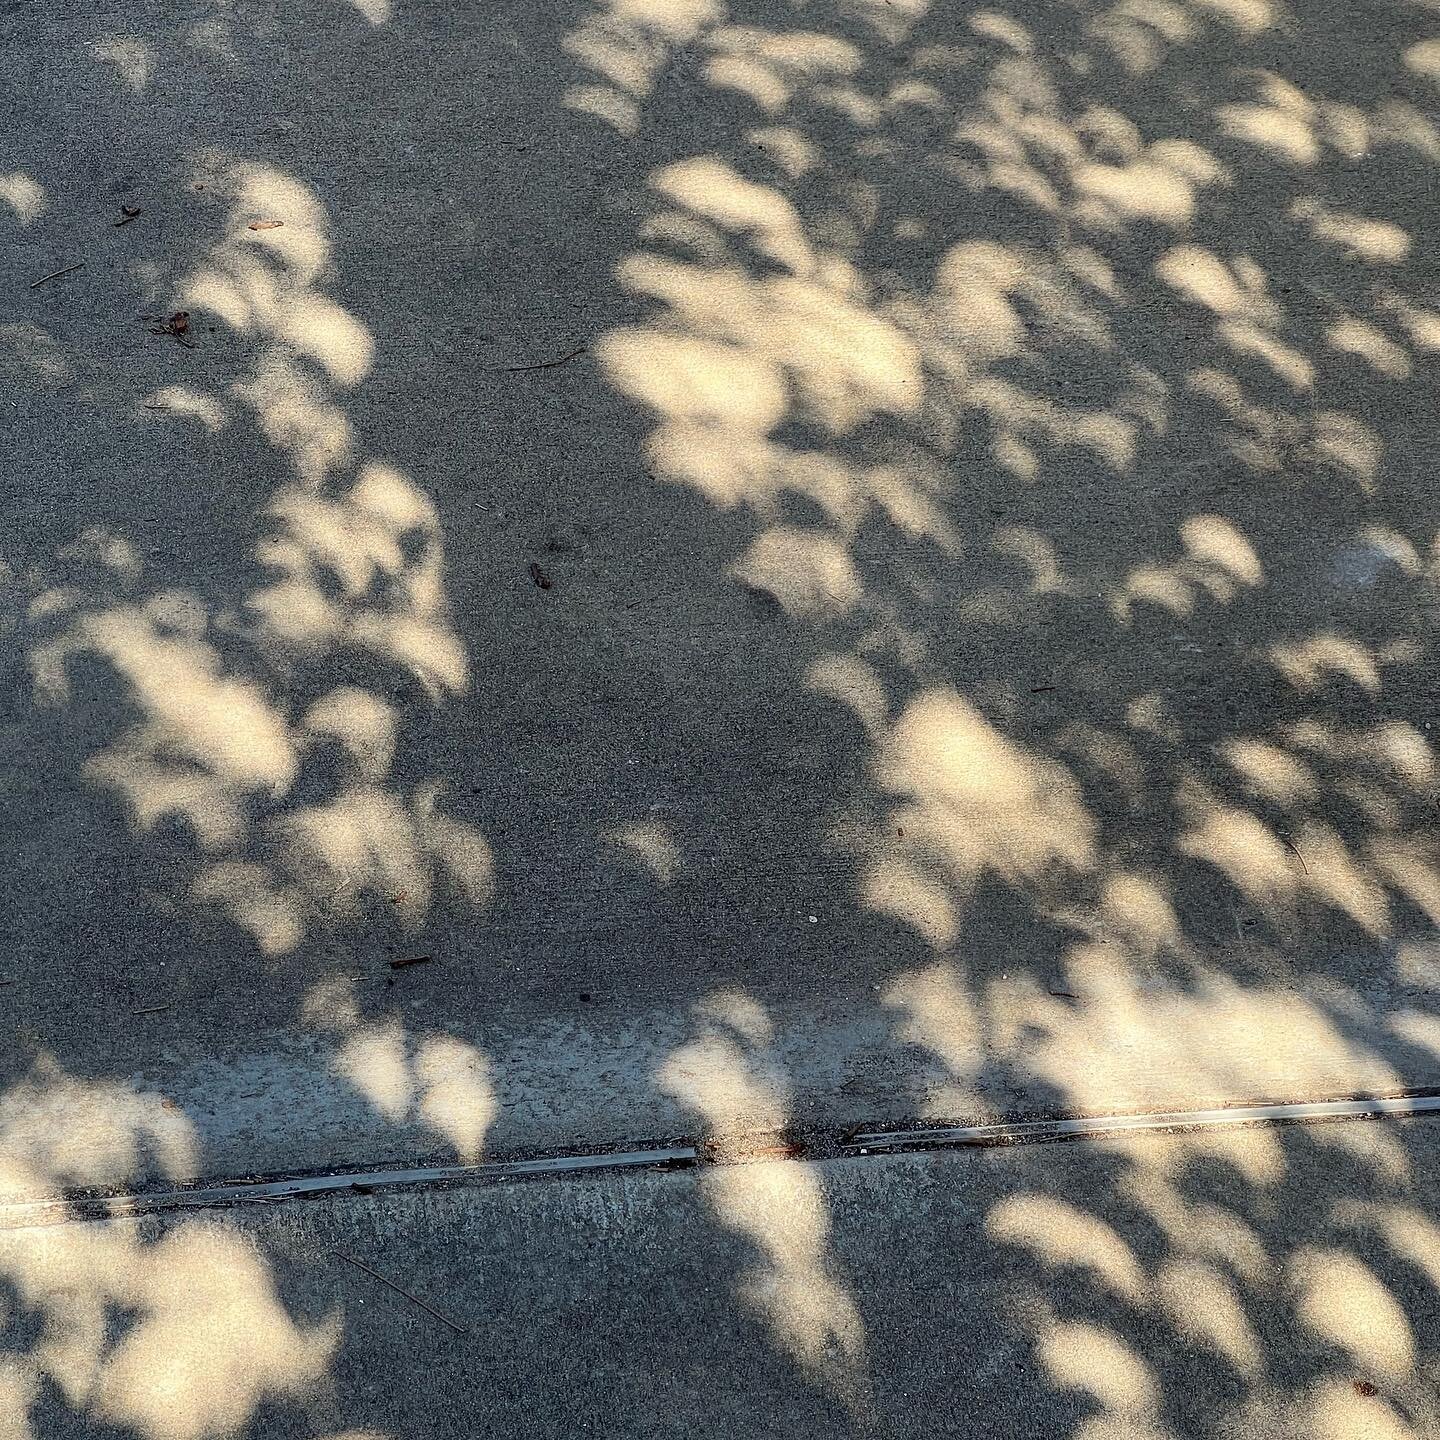 - c r e a t e
A bright sunny day in Perth today for the partial solar eclipse. I rode around on my bike admiring the crescent shaped light spots on the pathway that were formed by the sun shining through the trees. The spaces between the leaves act a